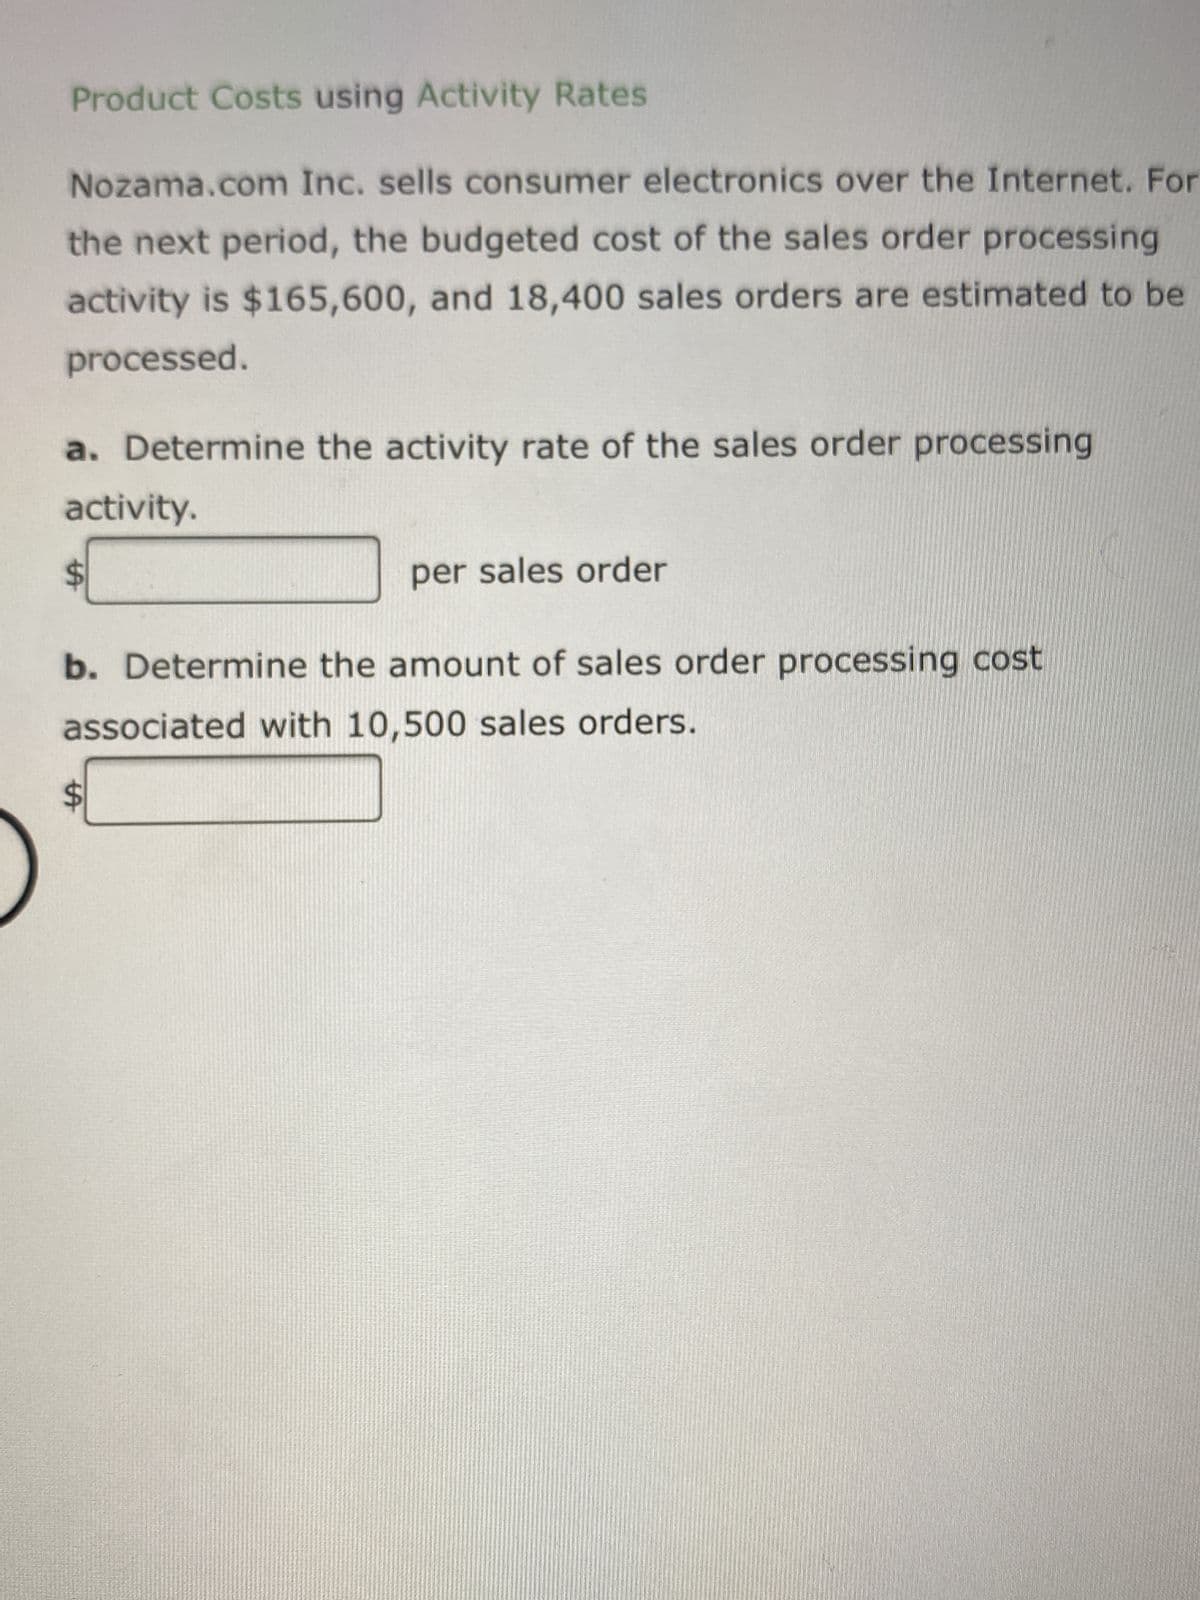 Product Costs using Activity Rates
Nozama.com Inc. sells consumer electronics over the Internet. For
the next period, the budgeted cost of the sales order processing
activity is $165,600, and 18,400 sales orders are estimated to be
processed.
a. Determine the activity rate of the sales order processing
activity.
$
per sales order
b. Determine the amount of sales order processing cost
associated with 10,500 sales orders.
$